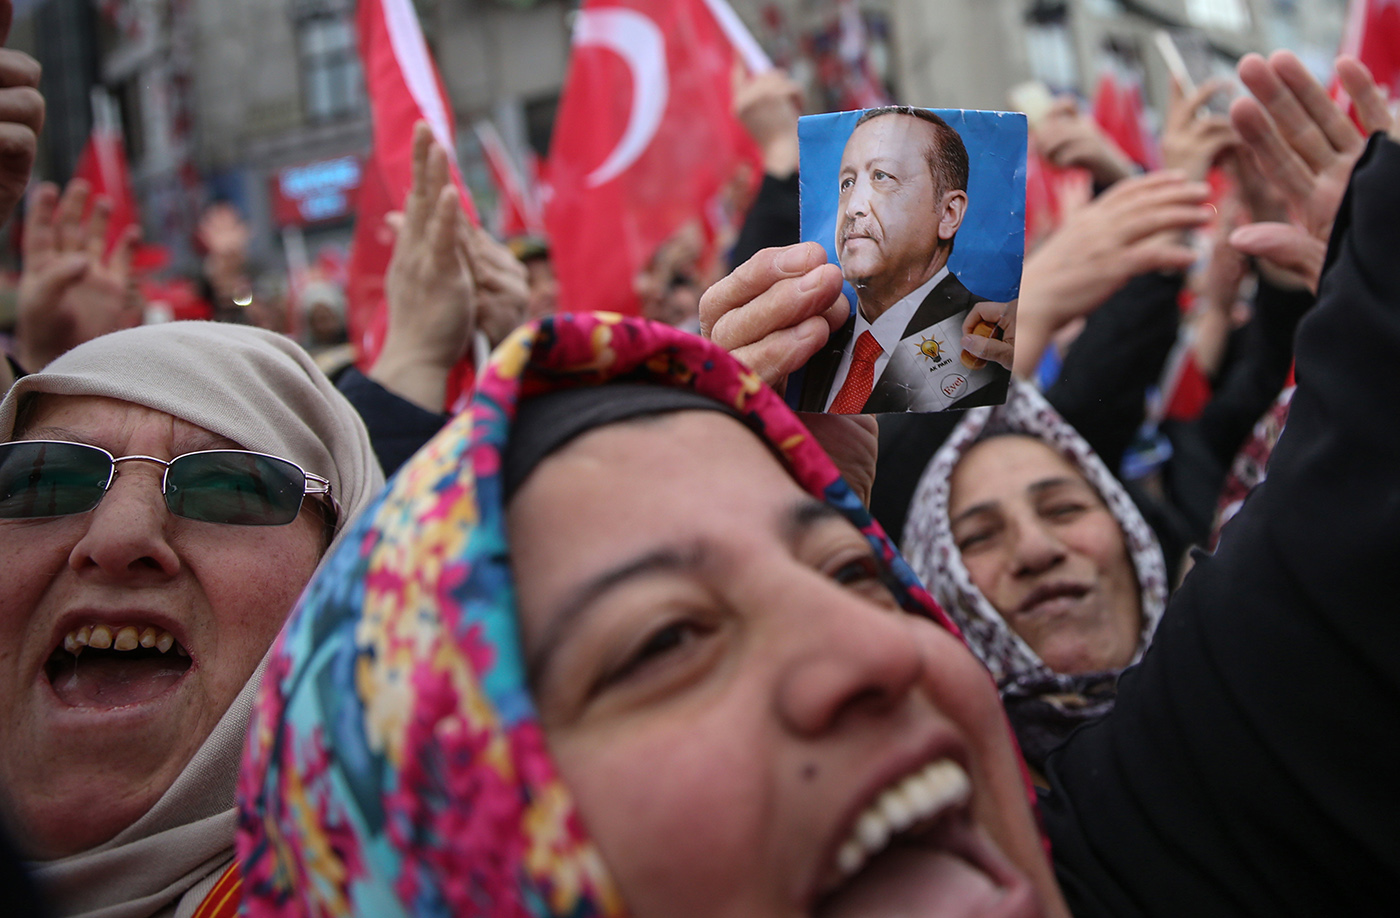  Supporters of Turkish President Recep Tayyip Erdogan cheer and wave flags during a Justice and Development Party (AK Party) local election campaign rally in Istanbul, Turkey, 29 March 2019.